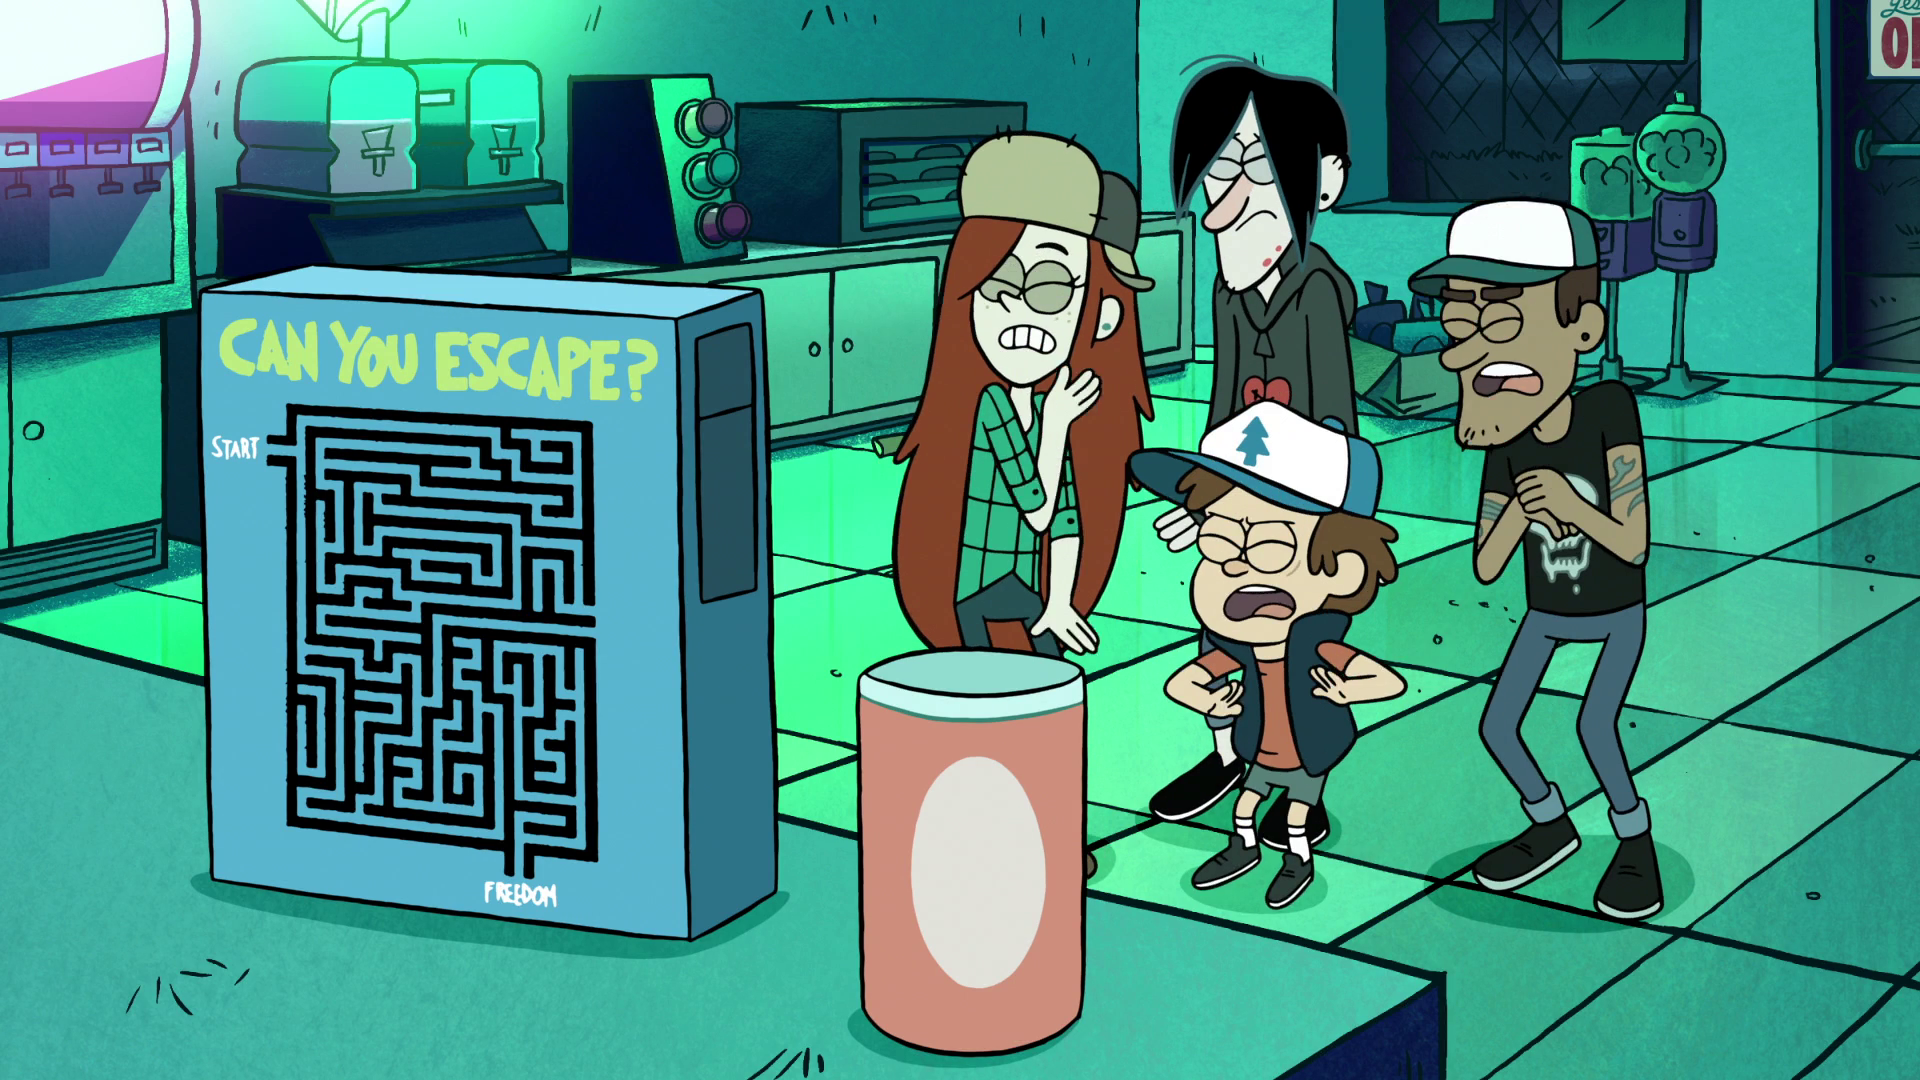 A Show for Kids: How 'Gravity Falls' Got Away with Murder